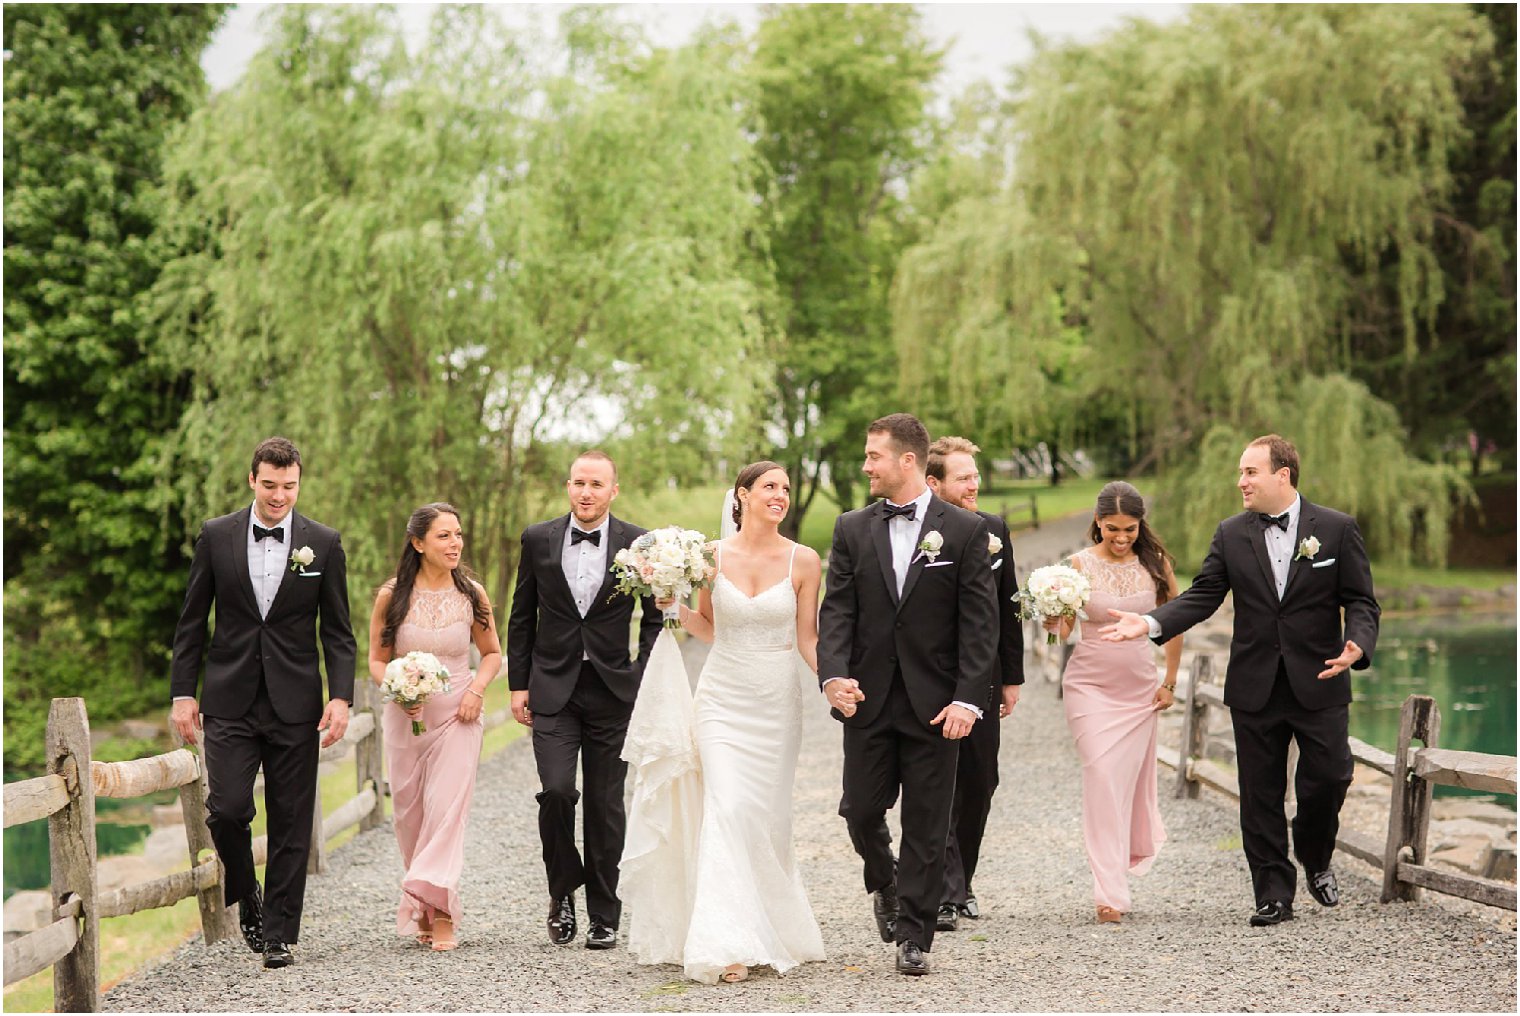 Bridal Party photo at Windows on the Water at Frogbridge